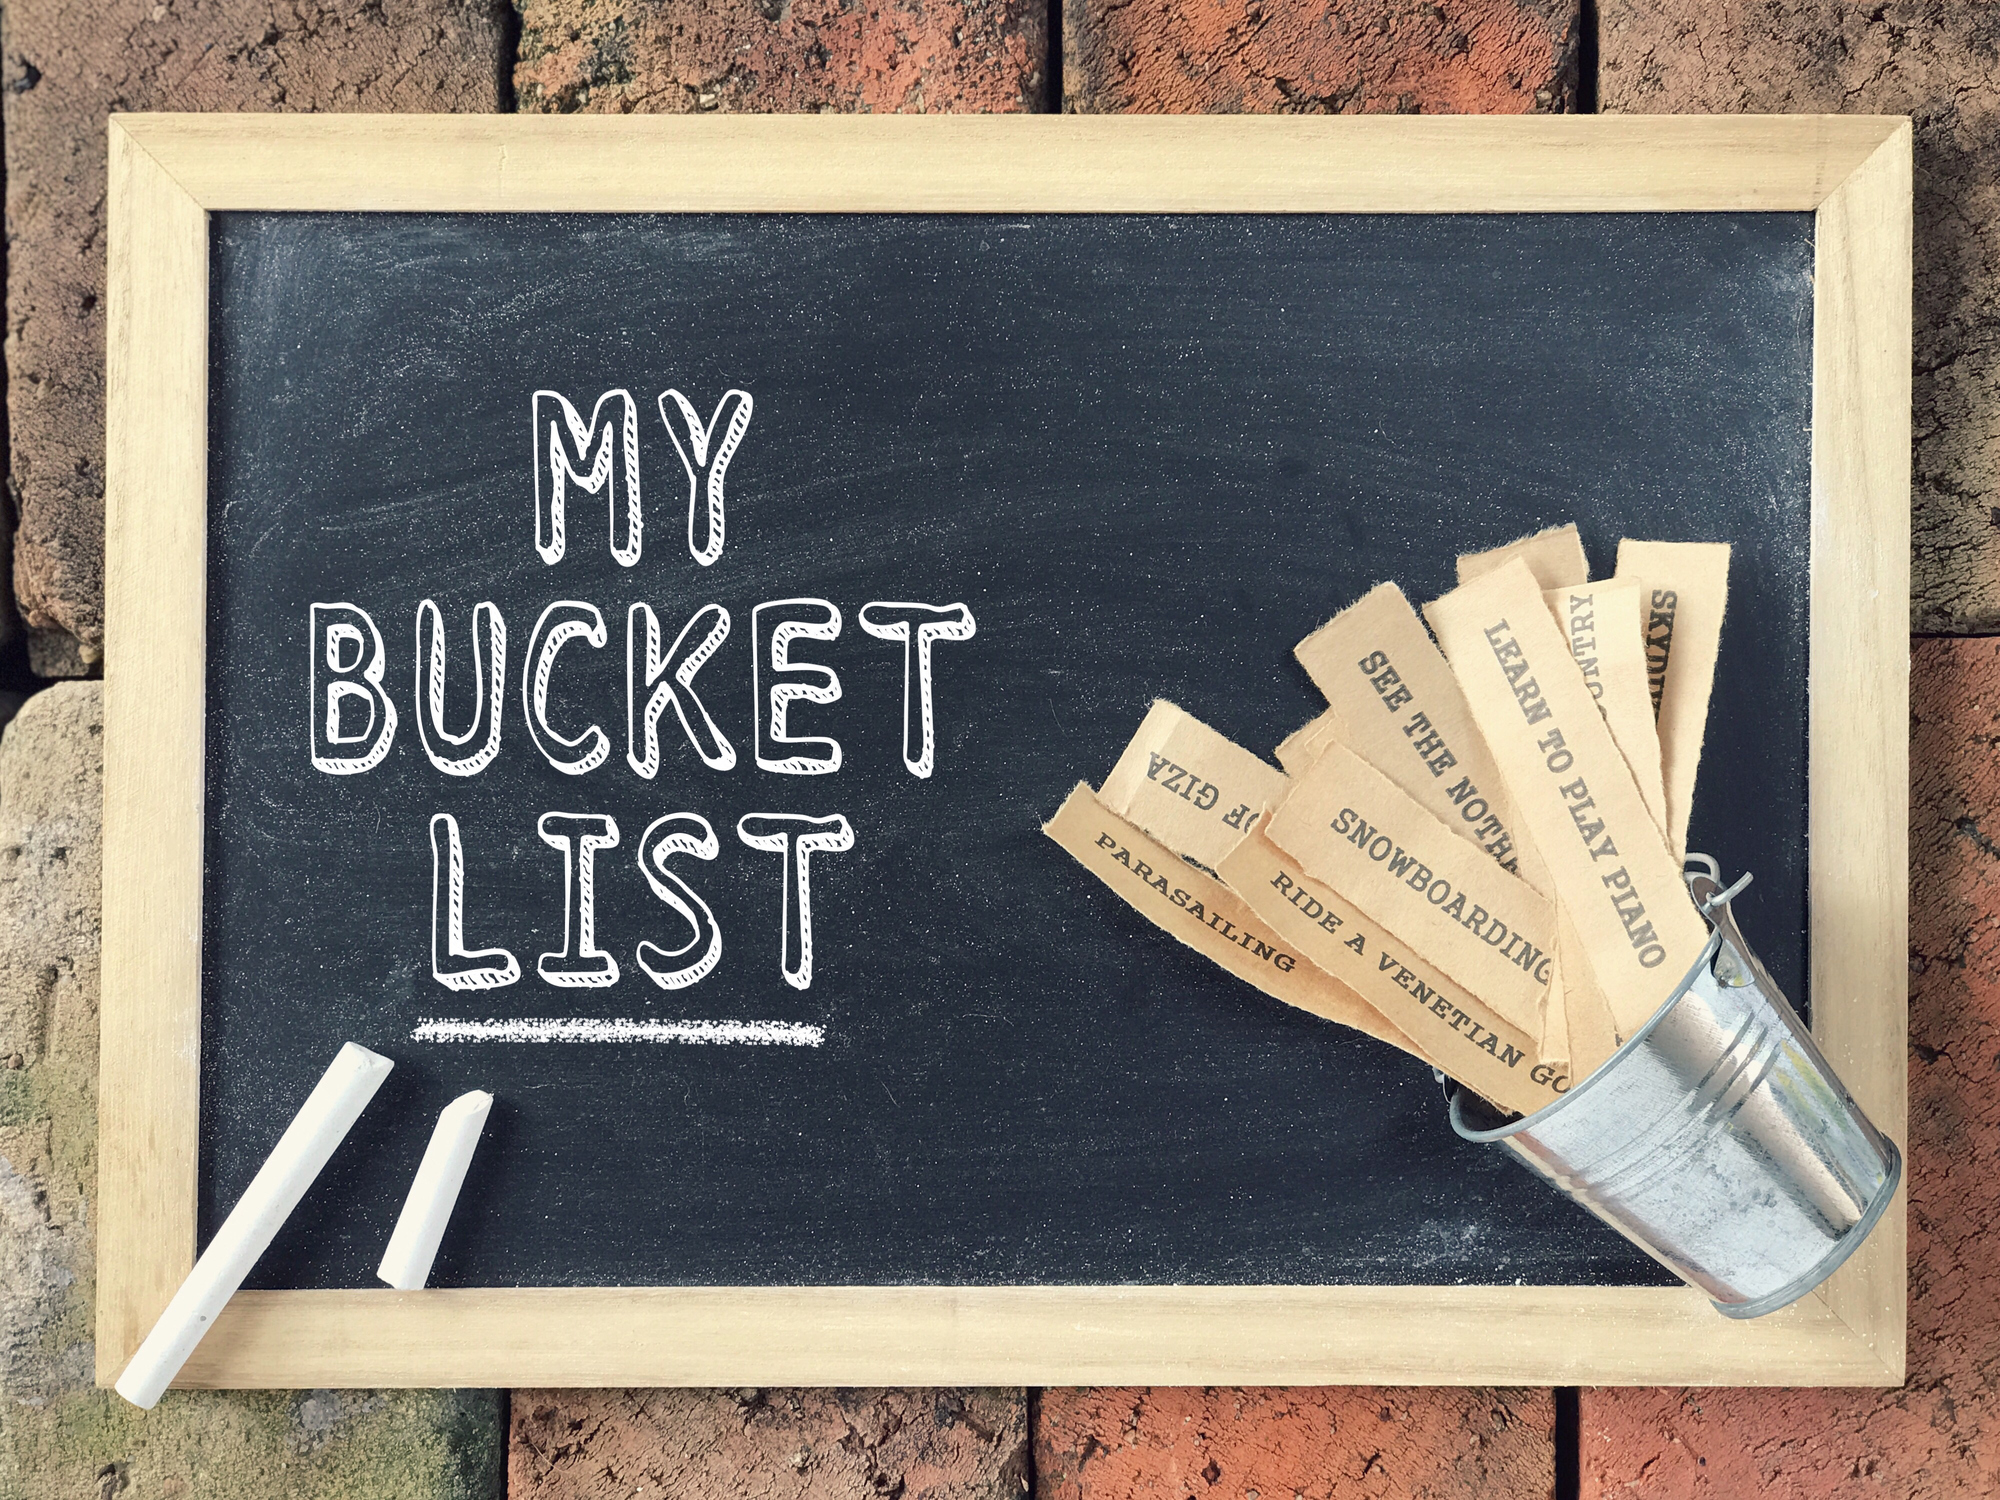 Bucket List: What's the Origin of the Term?